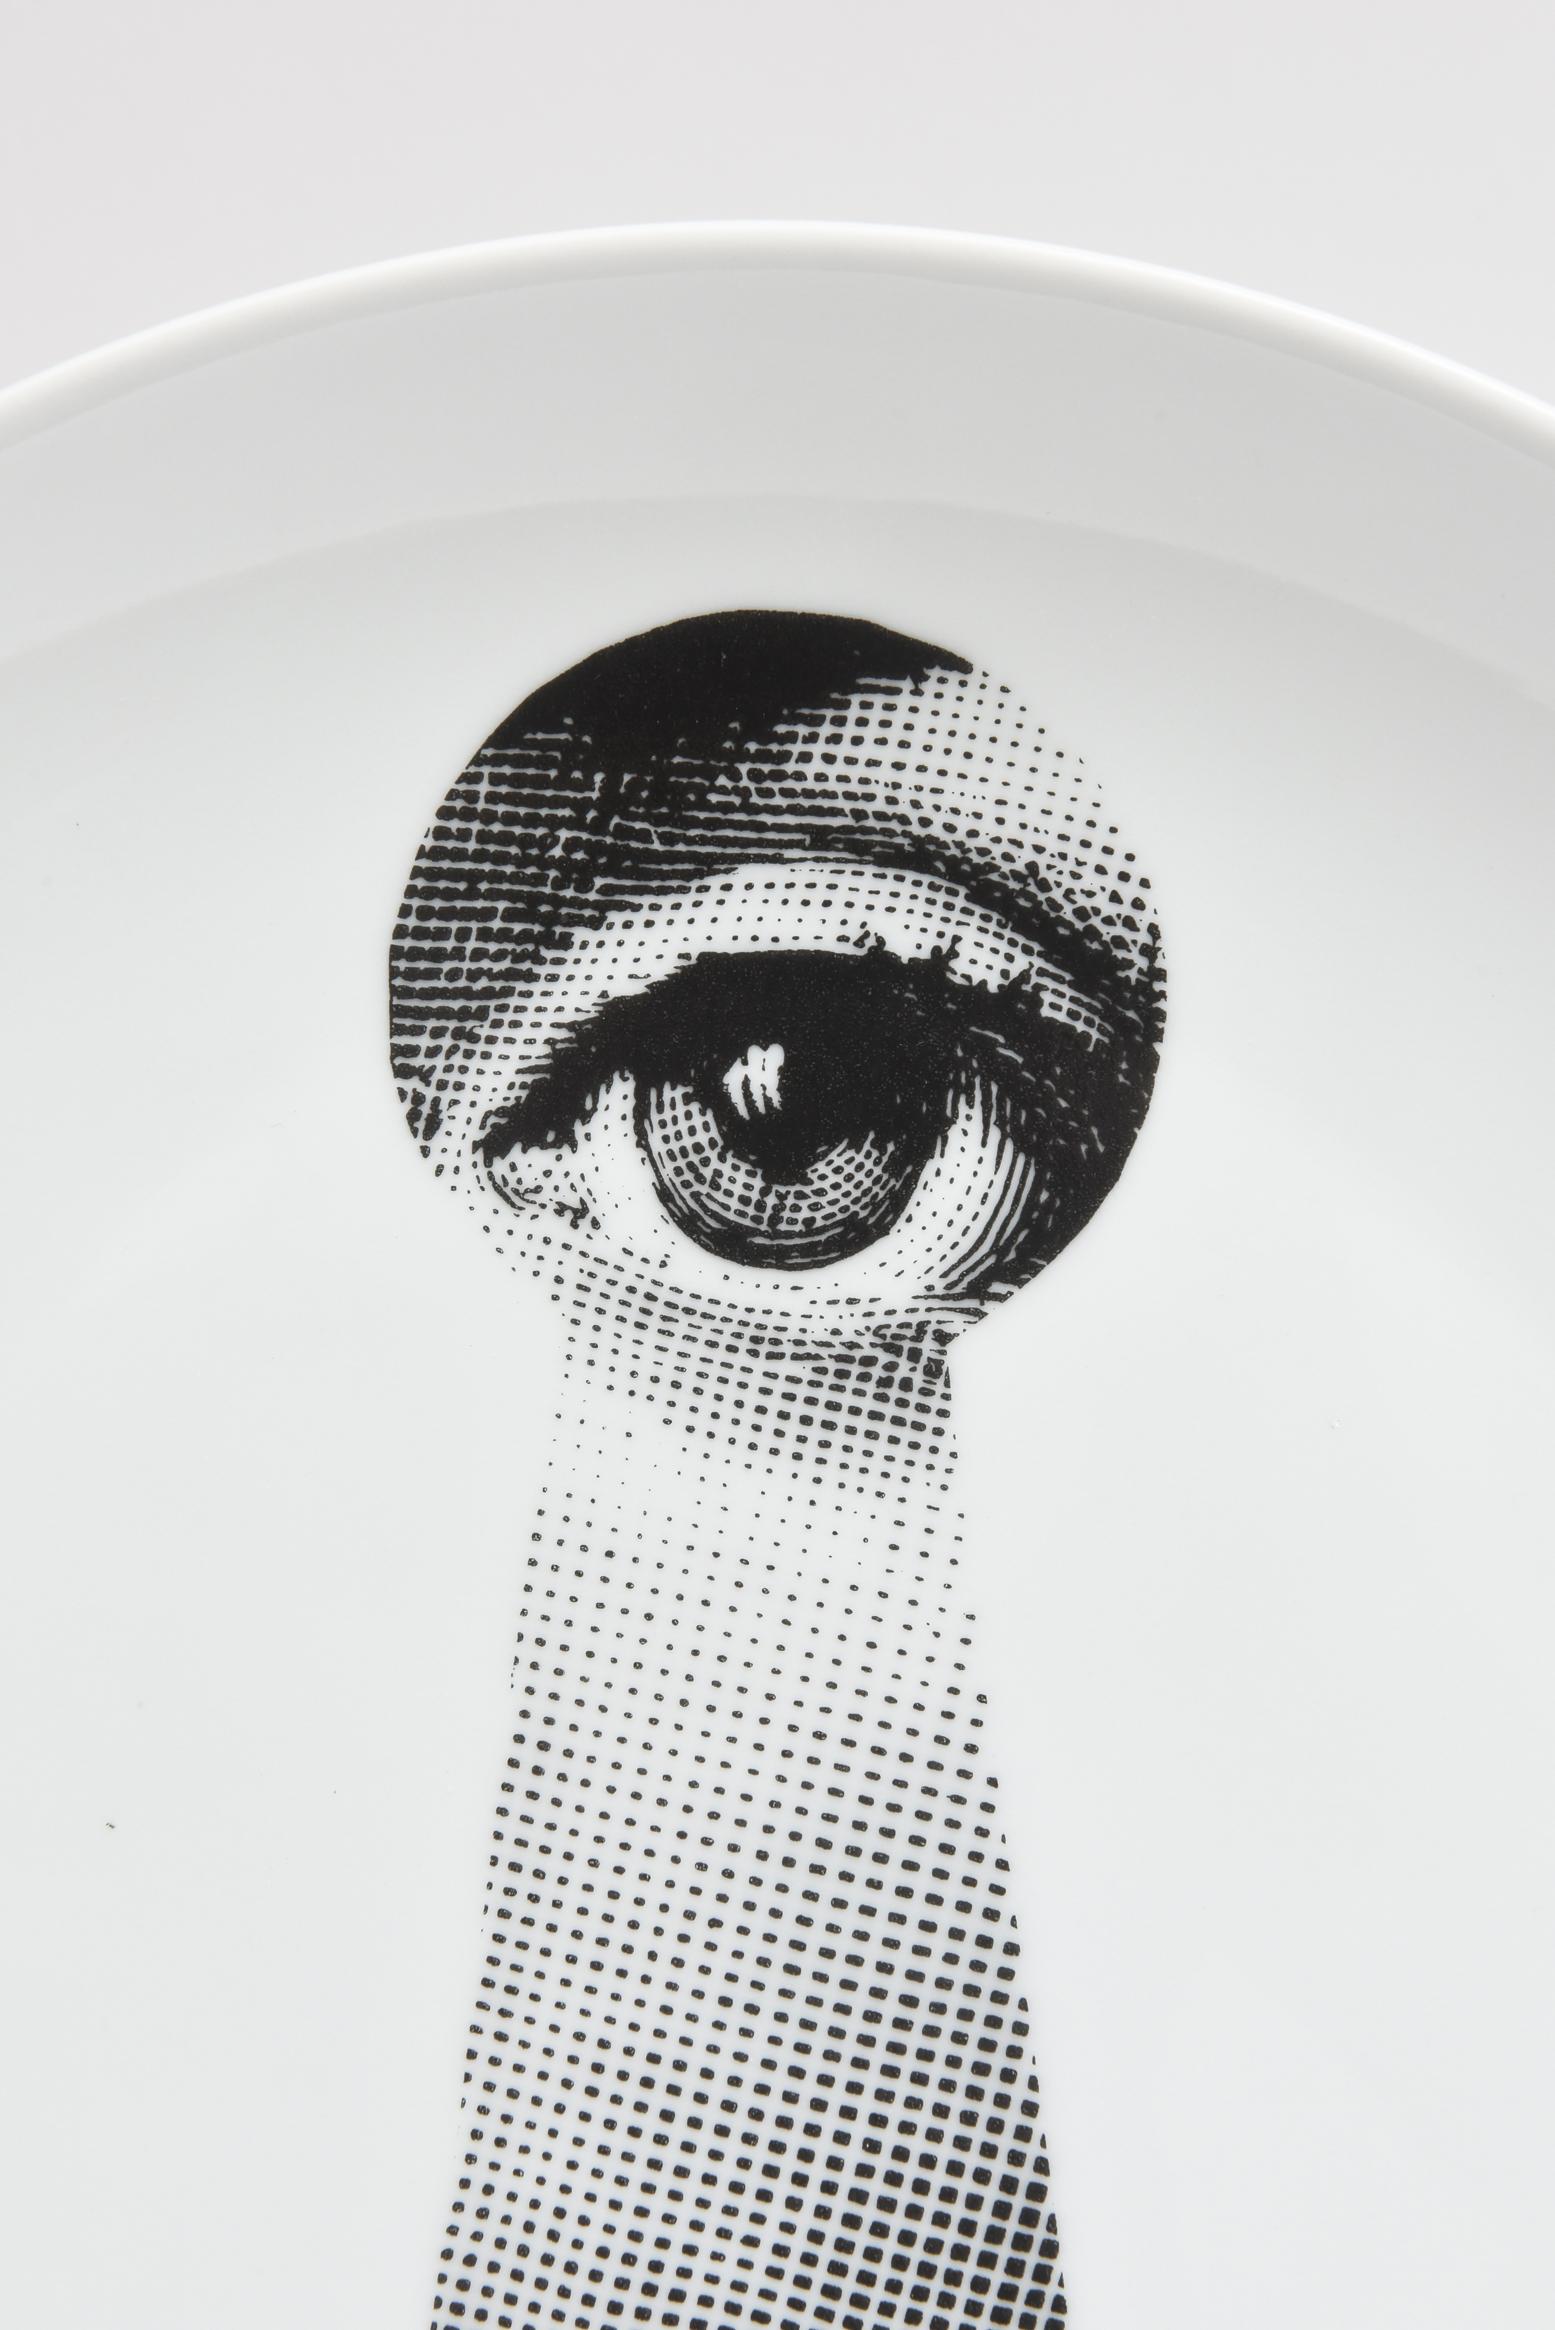 A Classic midcentury Italian Designed plate featuring an iconic image from Piero Fornasetti’s work, his muse the opera singer, Lina Cavalieri. Crisp black and white timeless design in very good vintage condition.